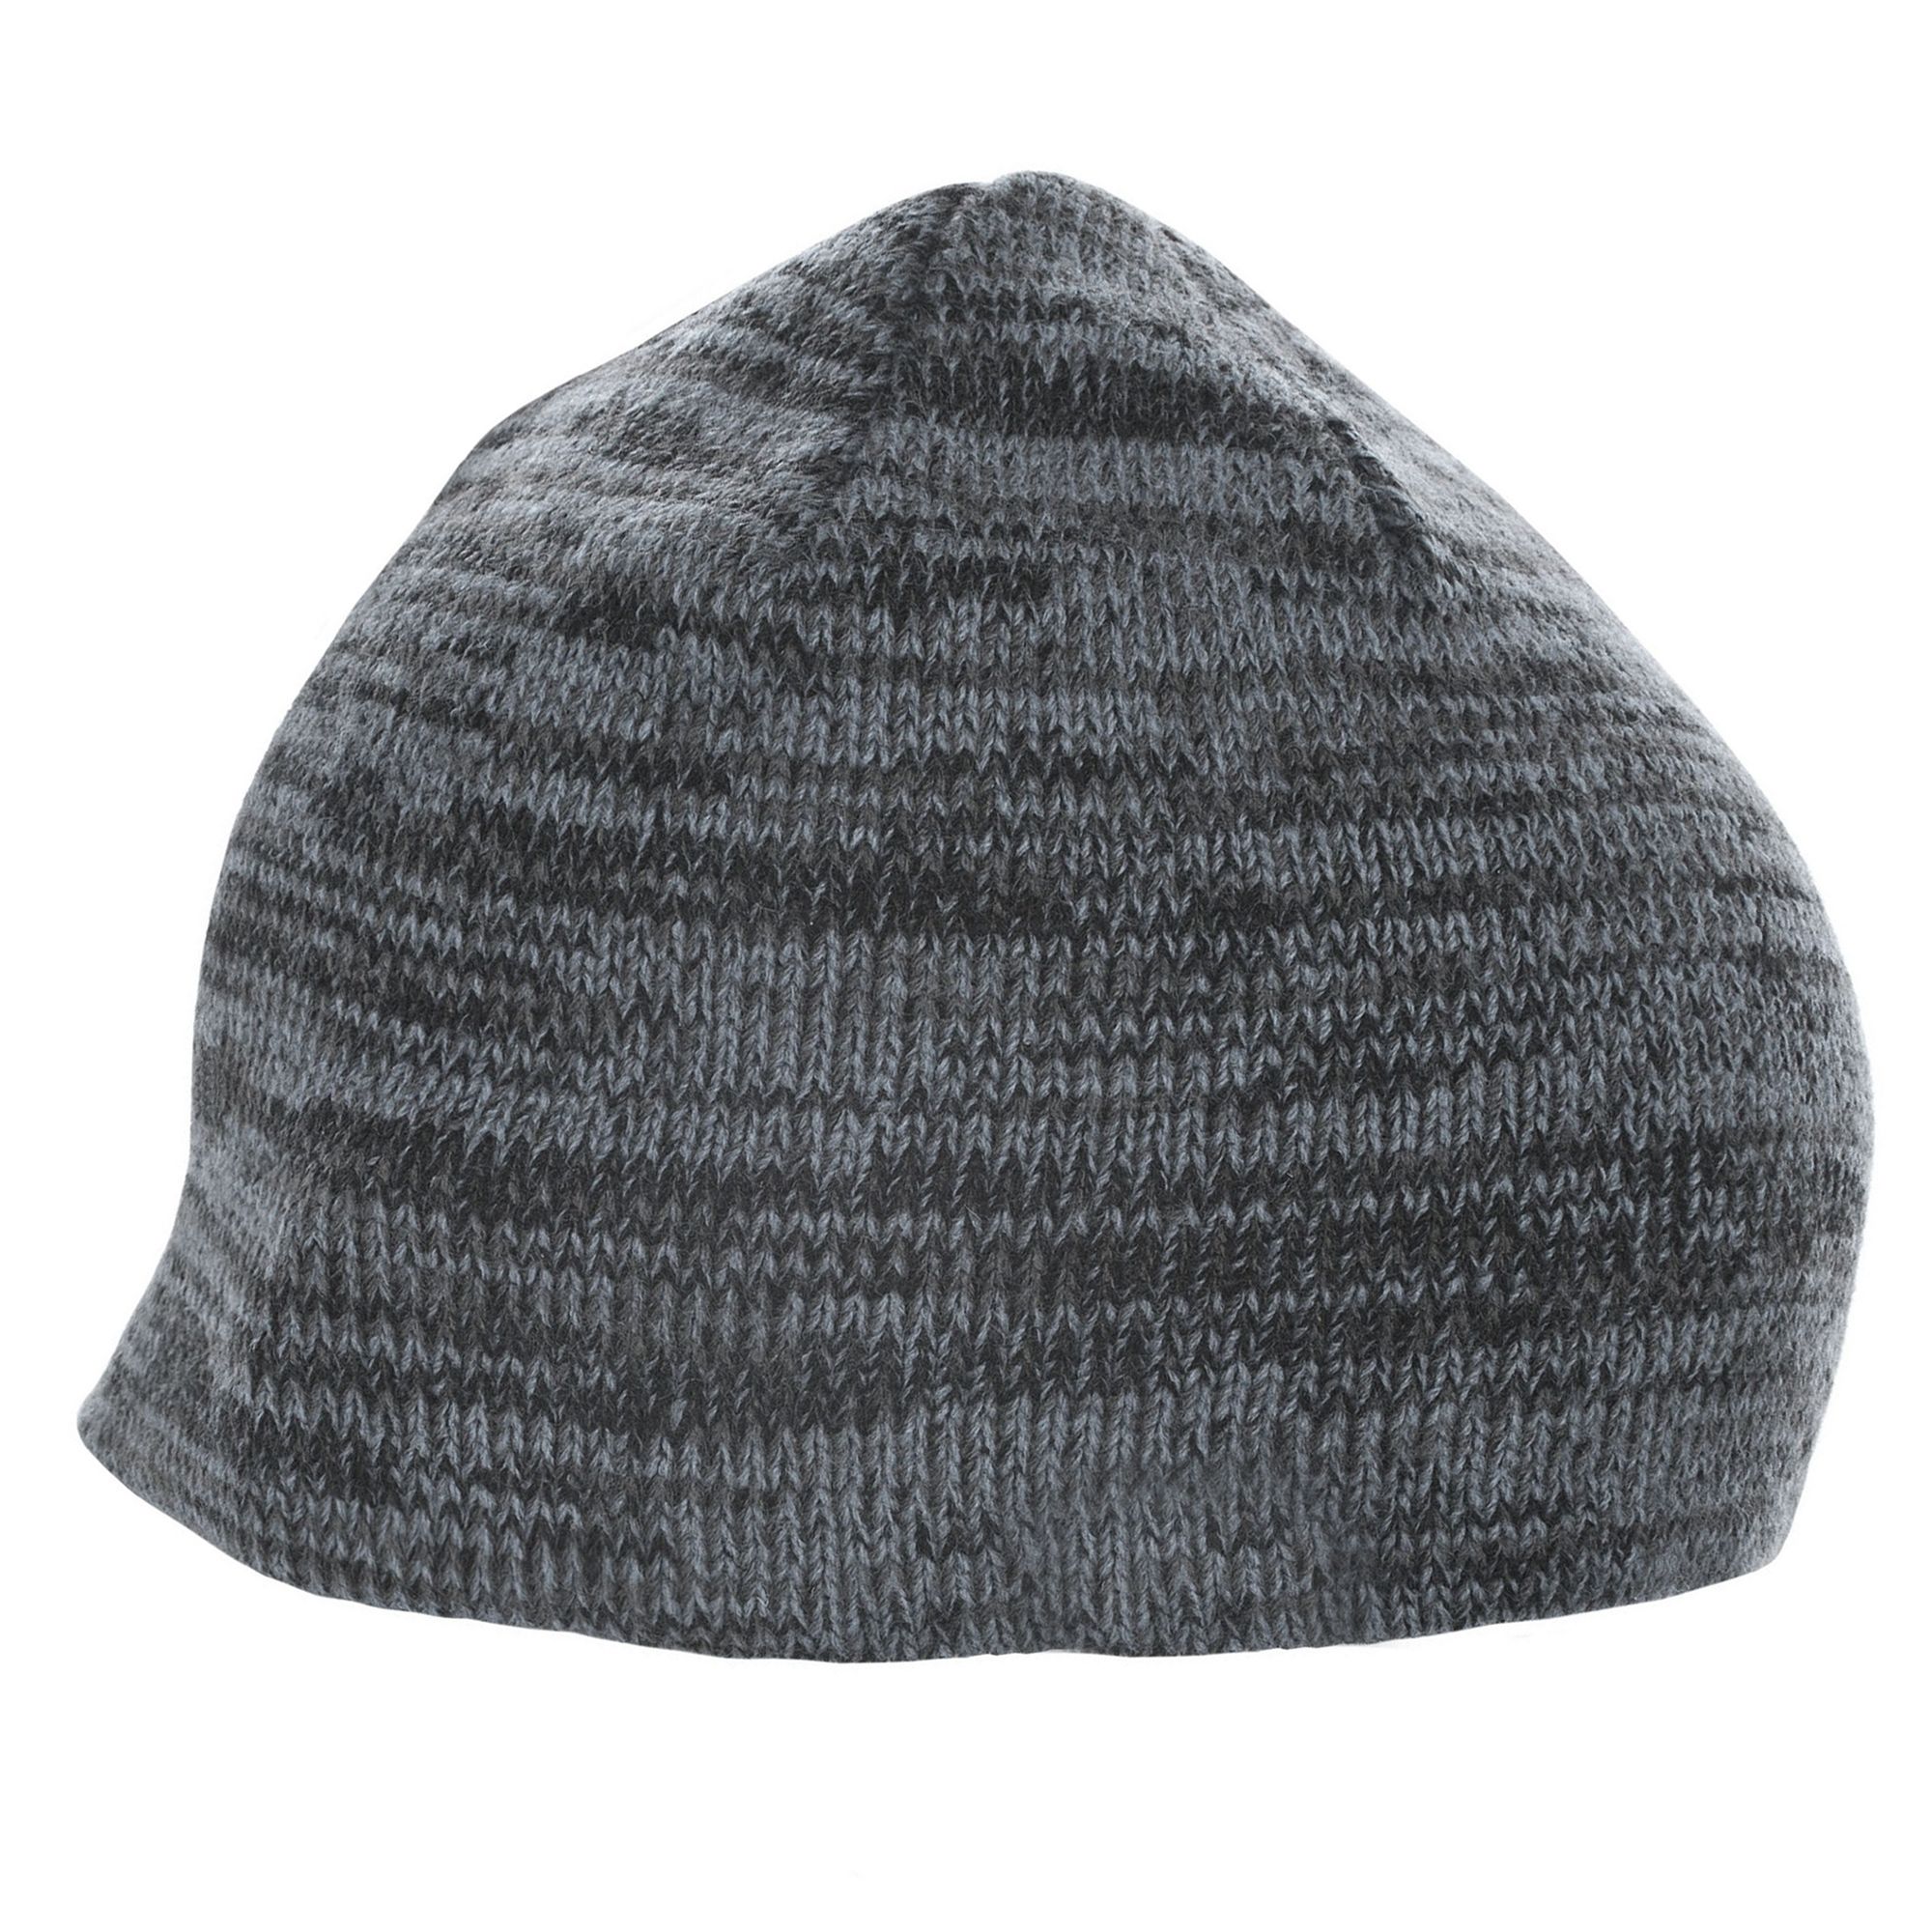 Mens Marl Beanie. Woven Label. Outer 100% Acrylic. Double Walled.